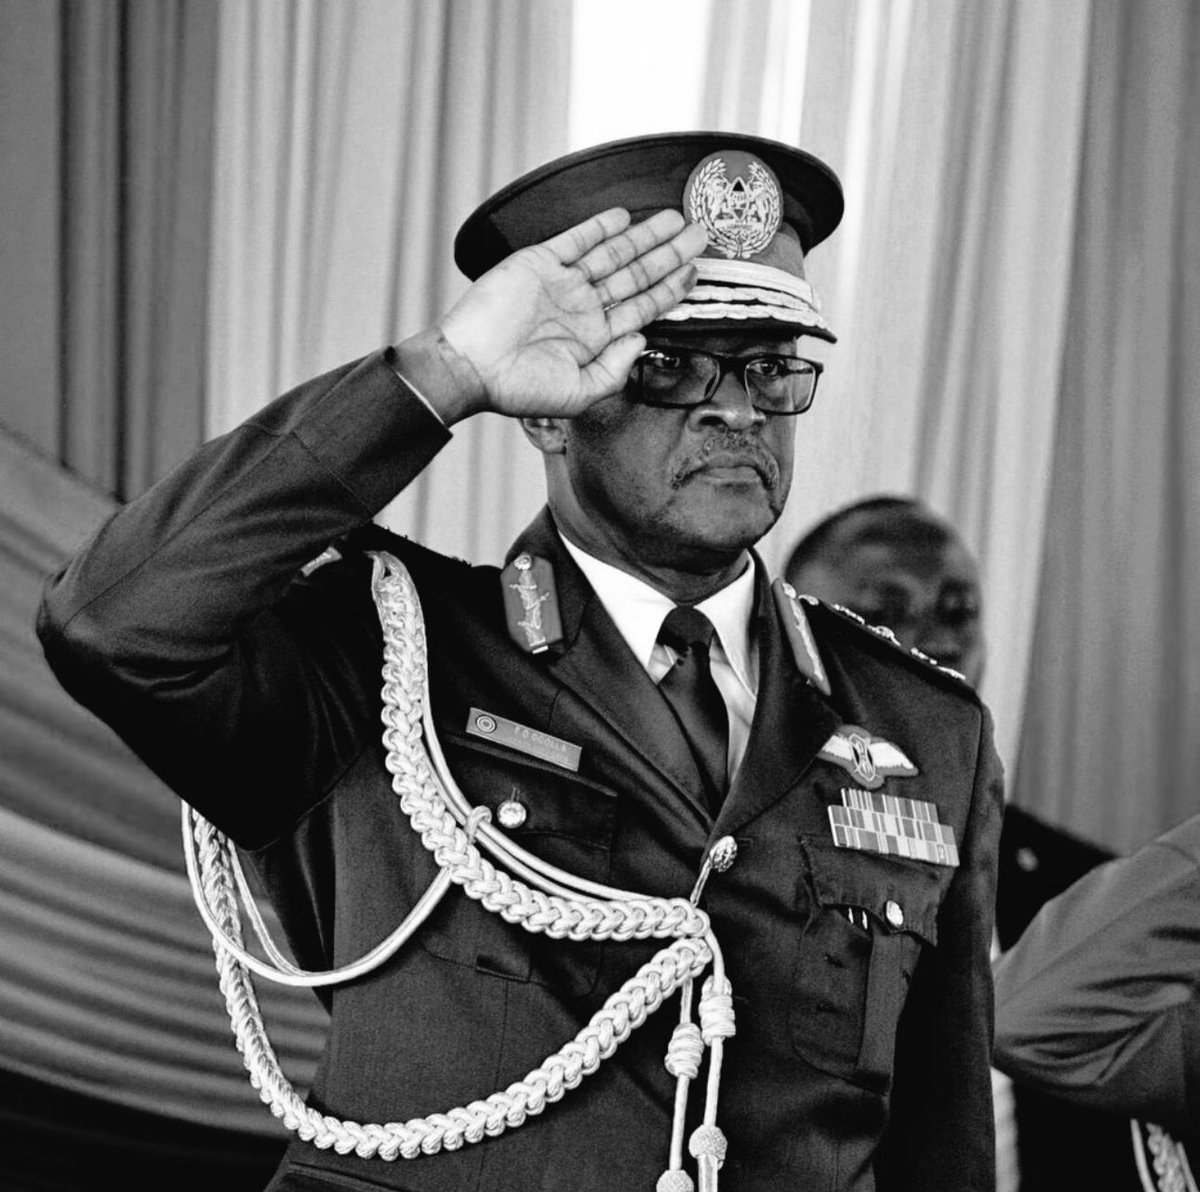 Condolences to the family, friends, and the entire nation on the passing of CDF Francis Ogolla. May he rest in peace.